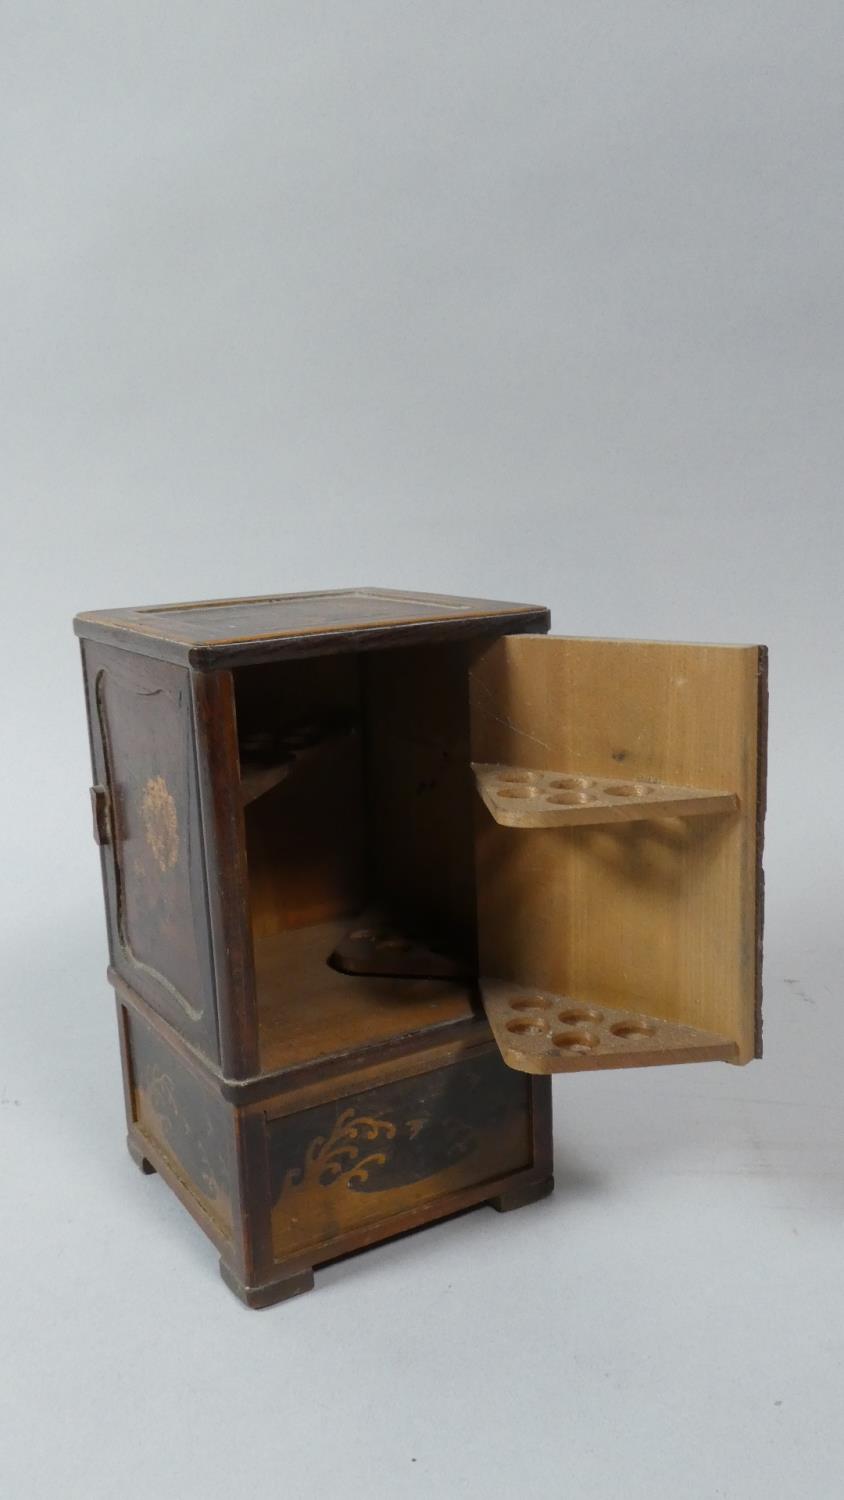 A Miniature Japanese Cigarette Box with Four Hinged Doors and Inlaid Decoration, 16cm High - Image 3 of 4